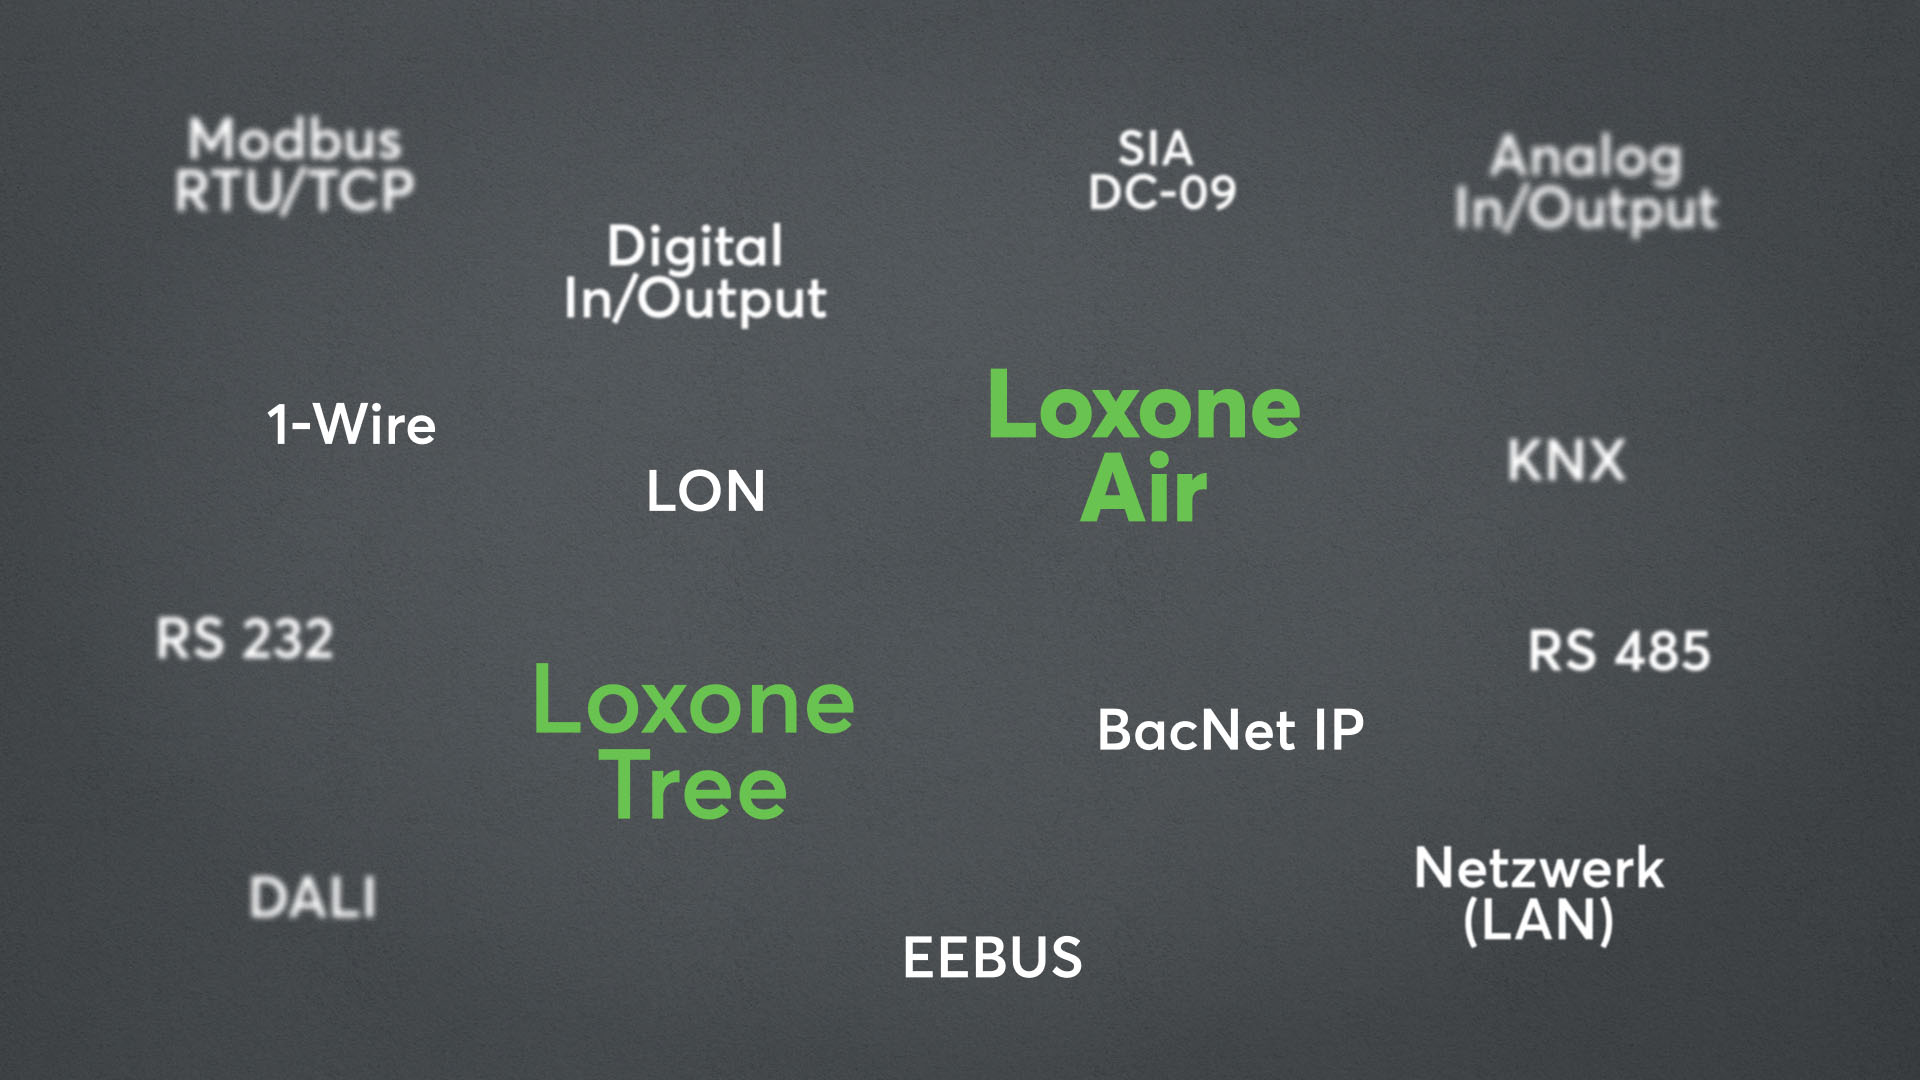 Some of Loxone's interfaces.